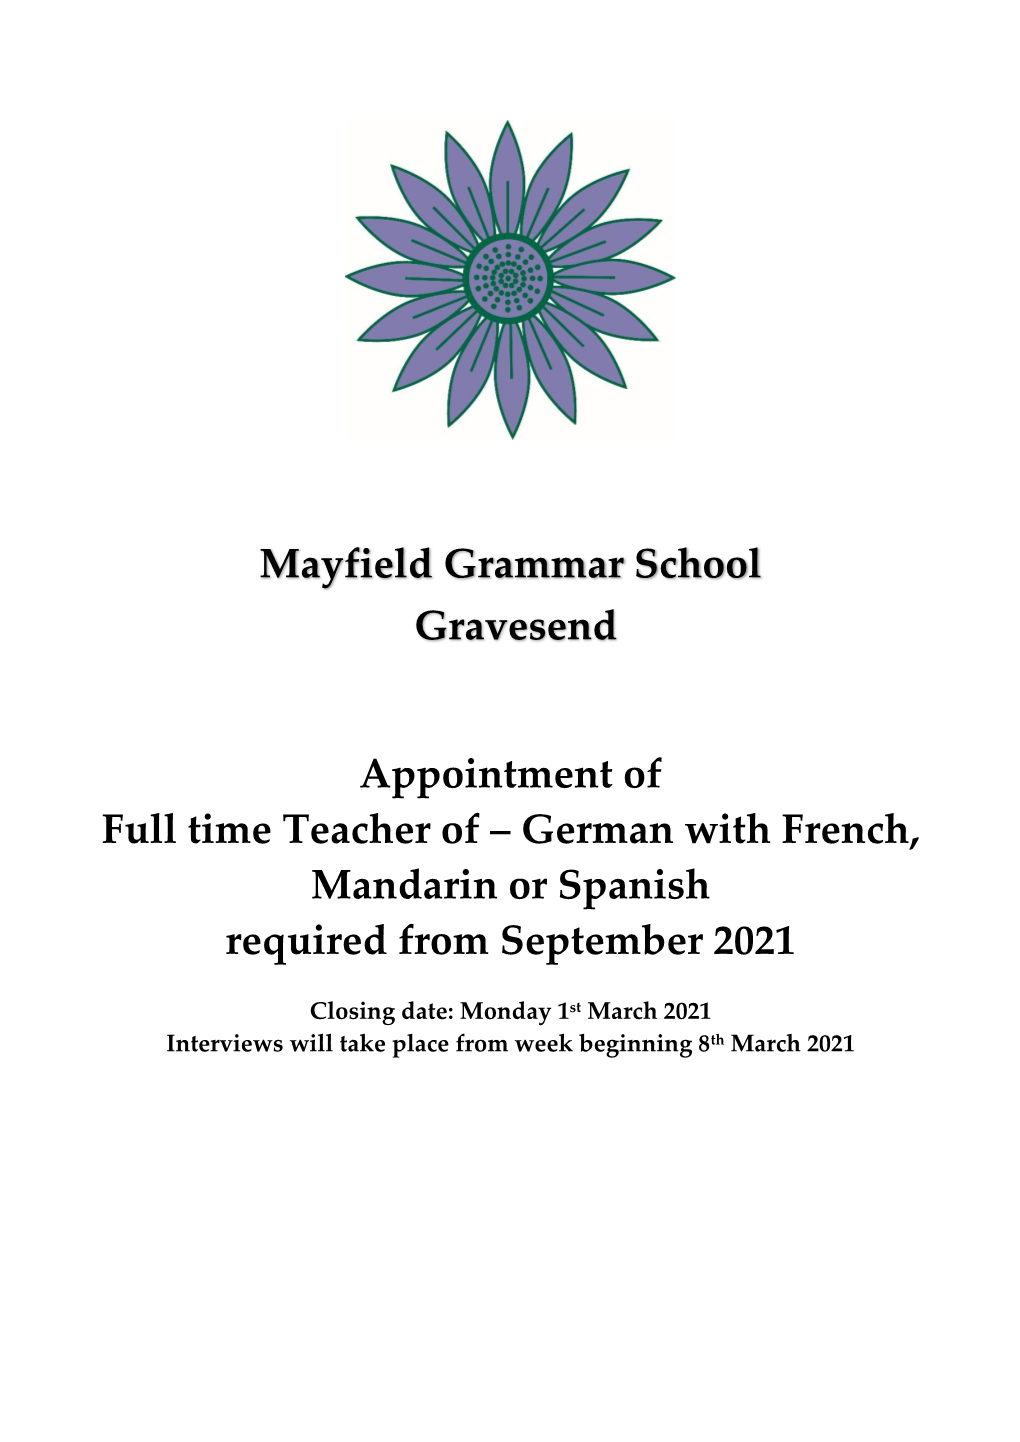 Mayfield Grammar School Gravesend Appointment of Full Time Teacher Of